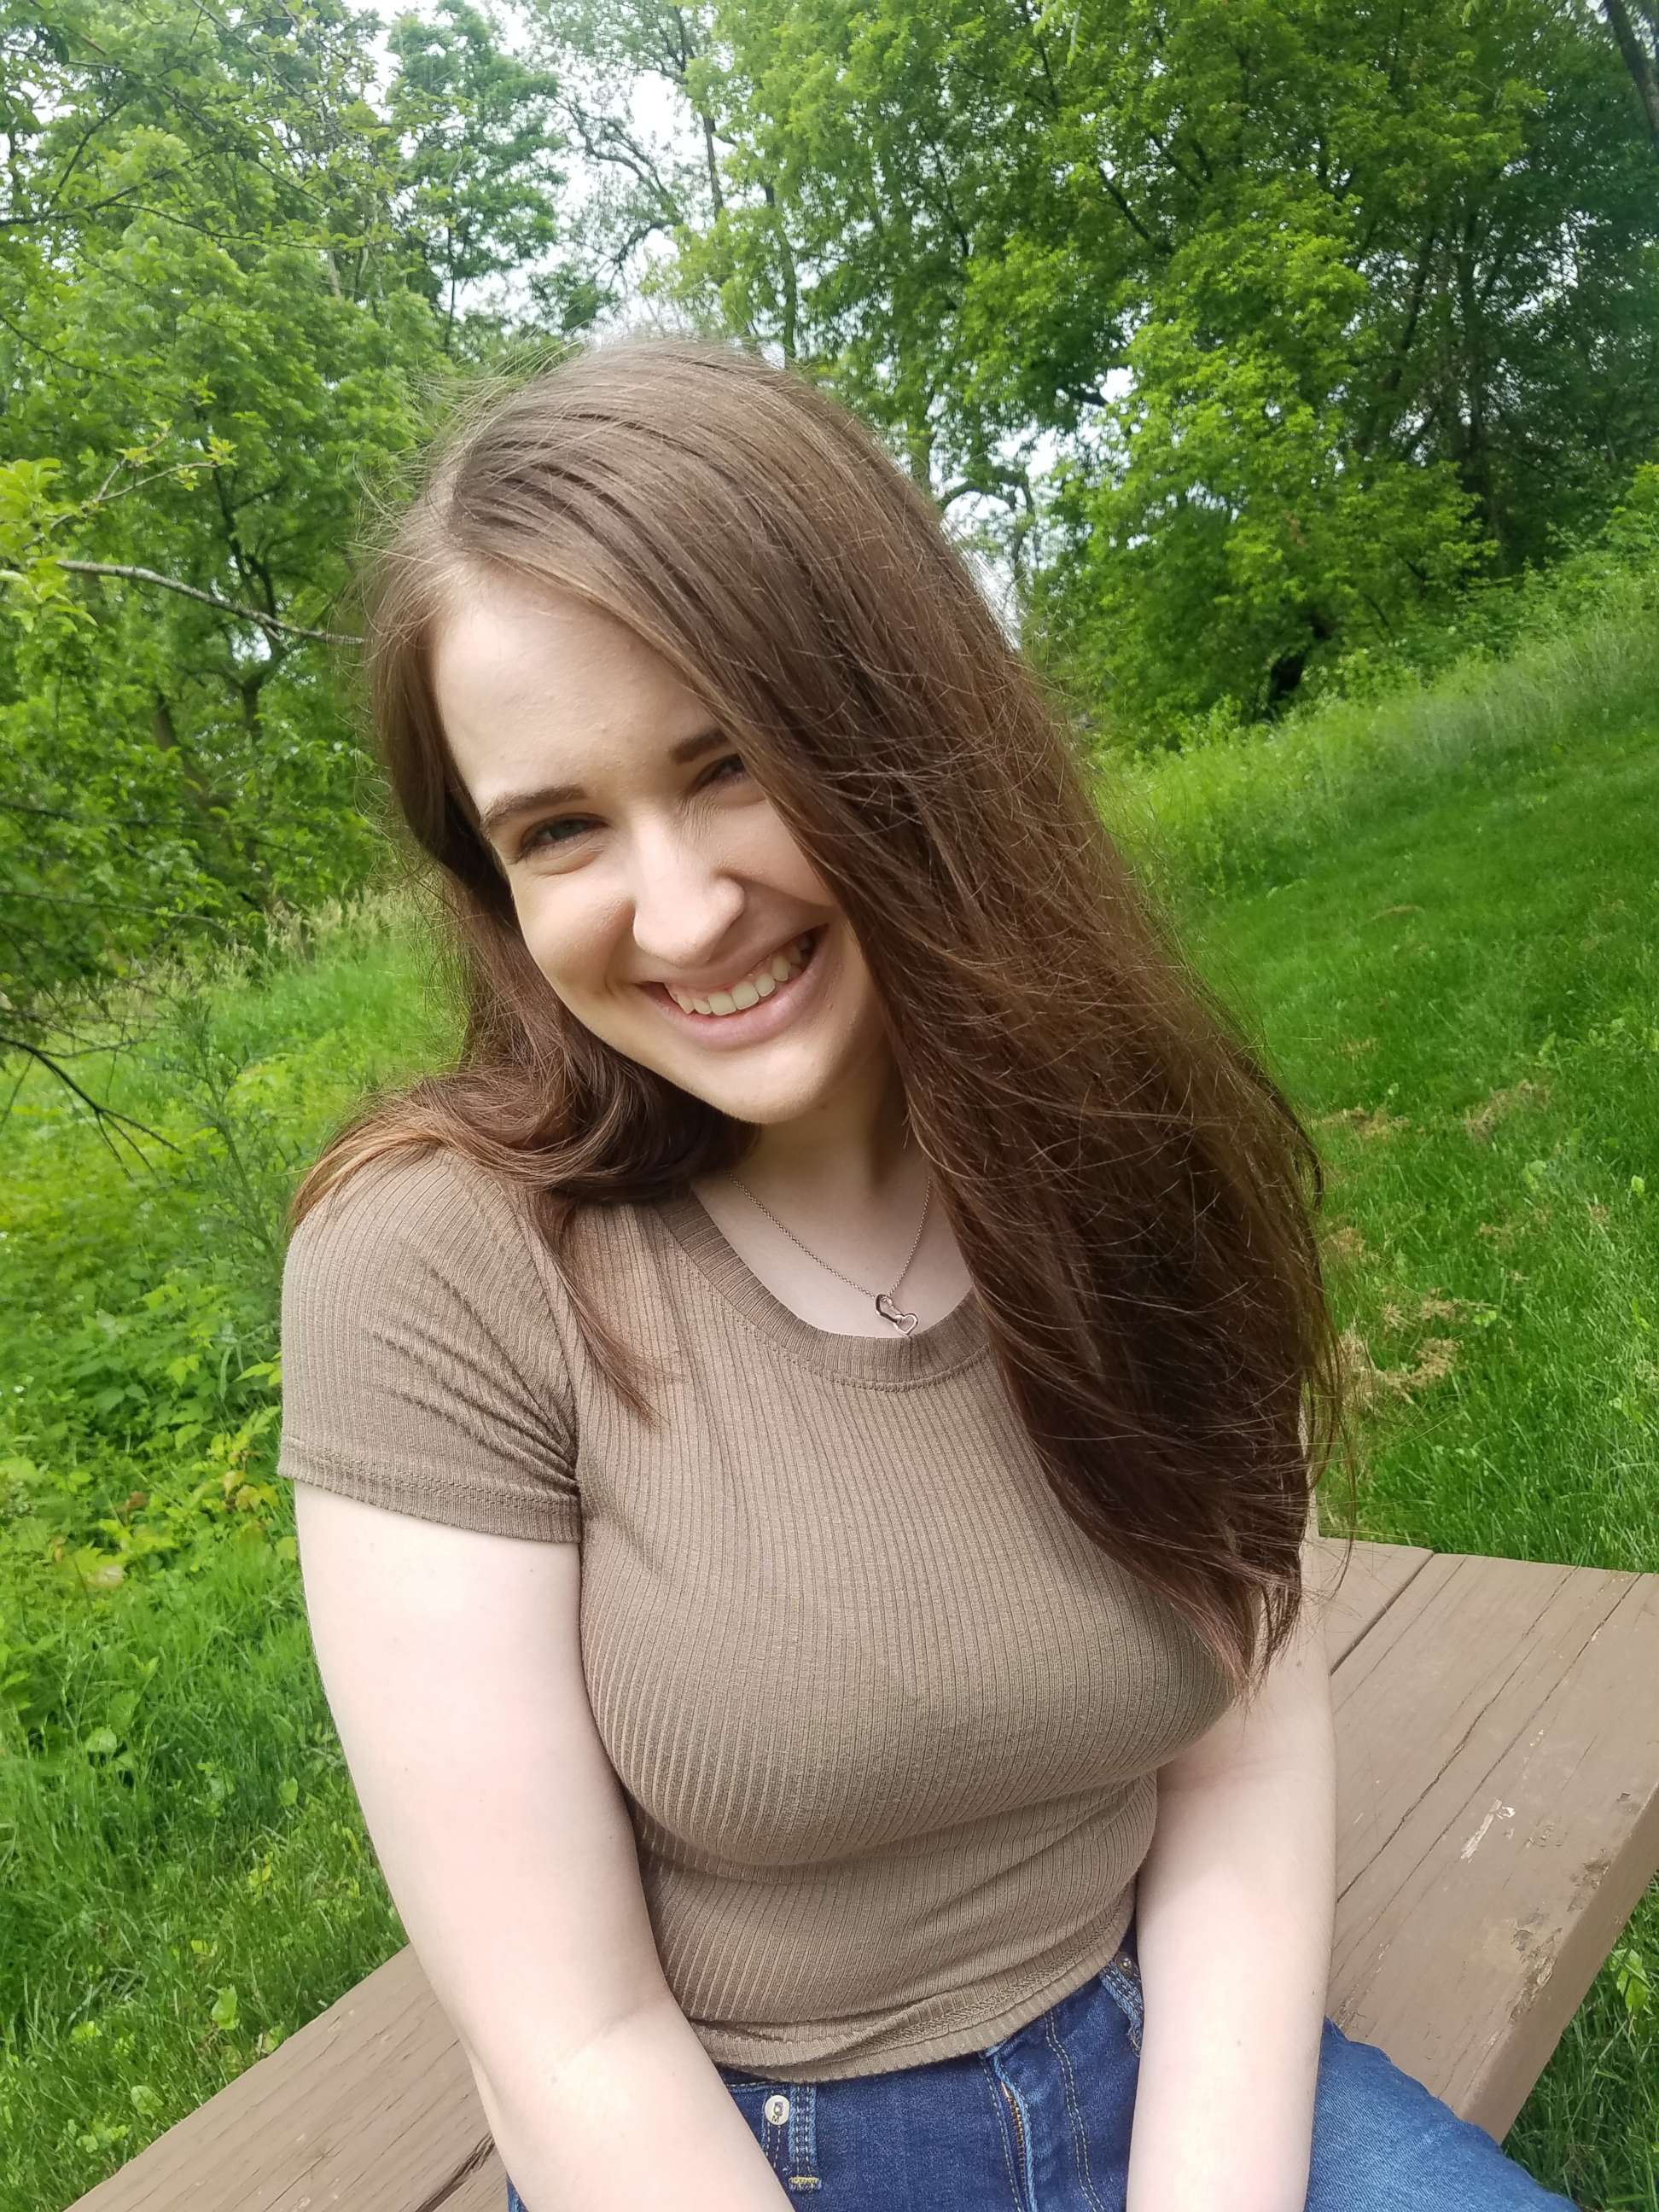 PHOTO: Payton Leutner, 17, said she is "grateful for all of the love and support" she received after friends tried killing her in the name of the fictional character "Slender Man" five years ago. 